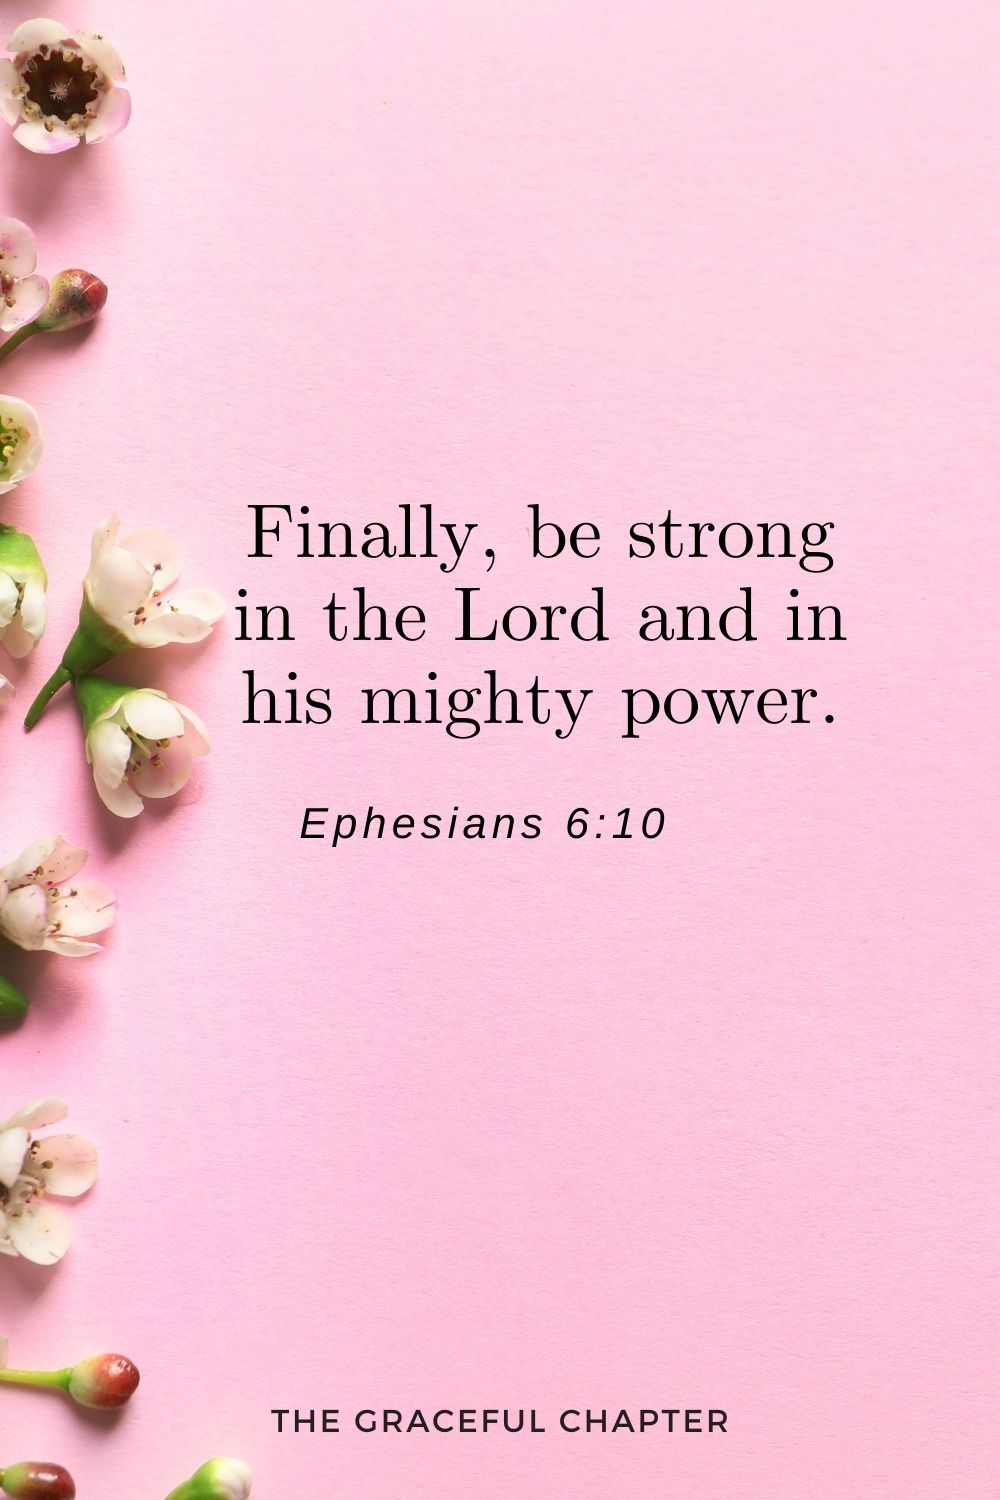 Finally, be strong in the Lord and in his mighty power. Ephesians 6:10